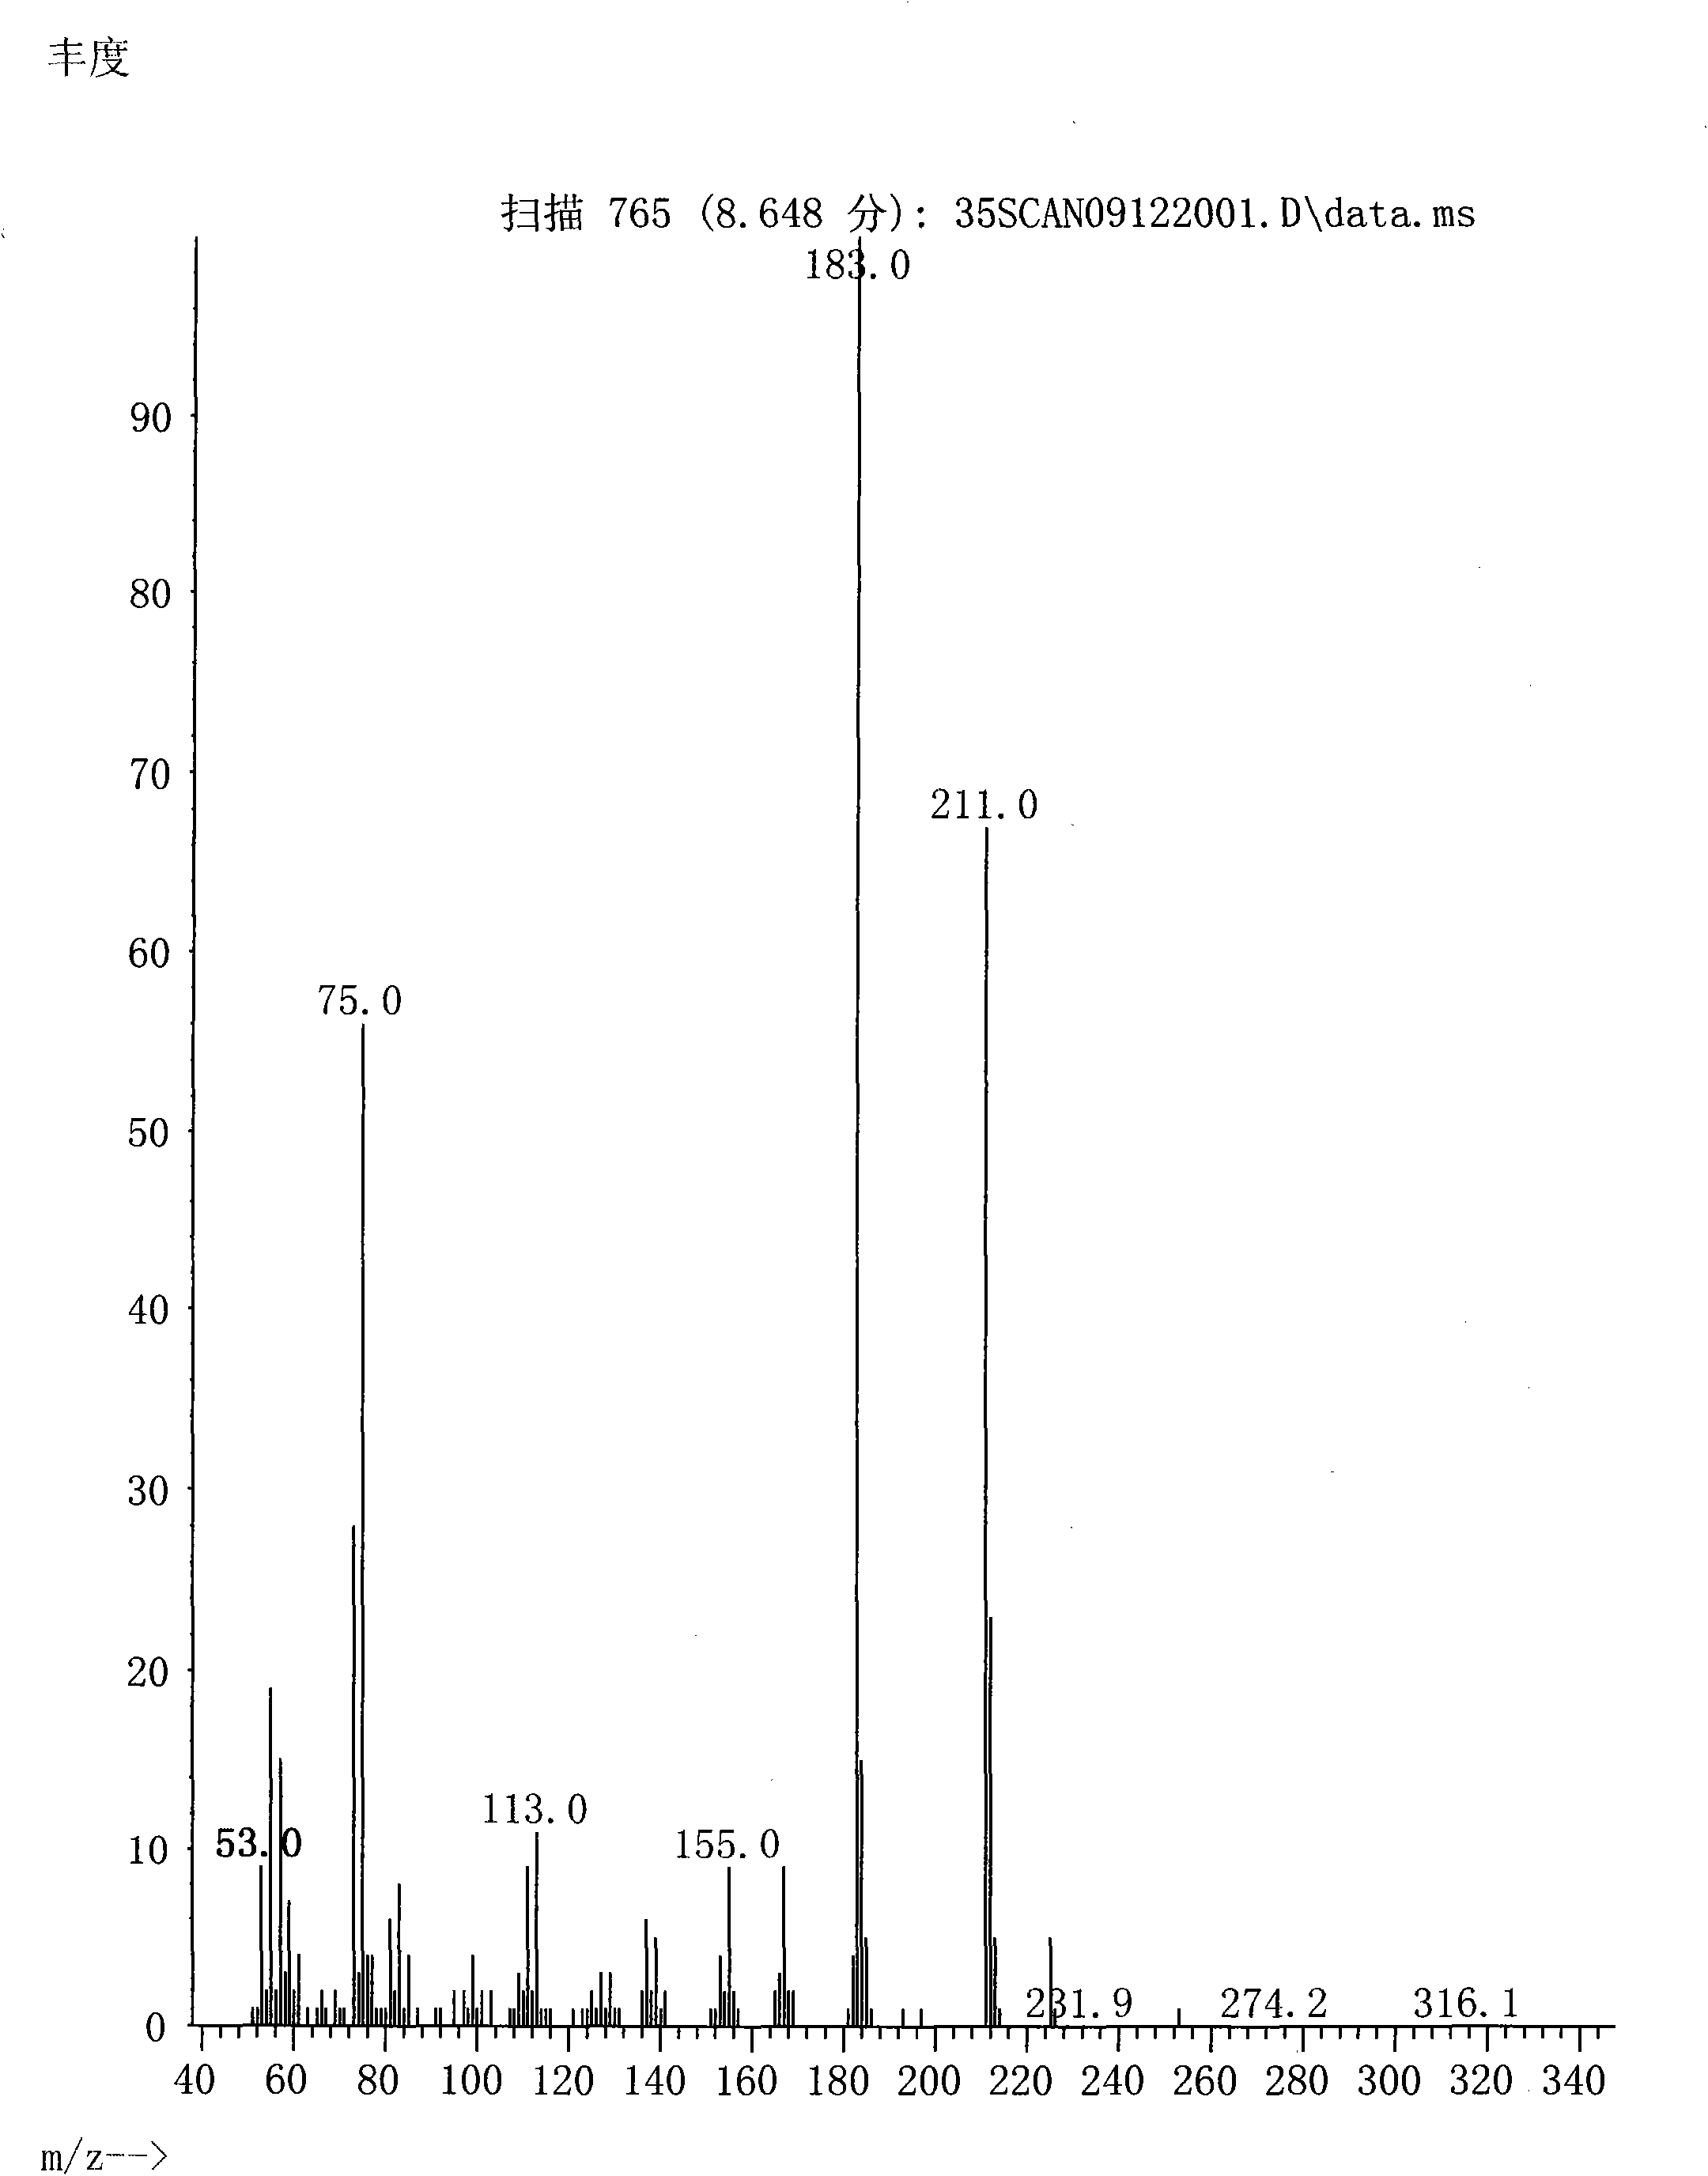 Method for measuring patulin in fruit jam and vegetable paste